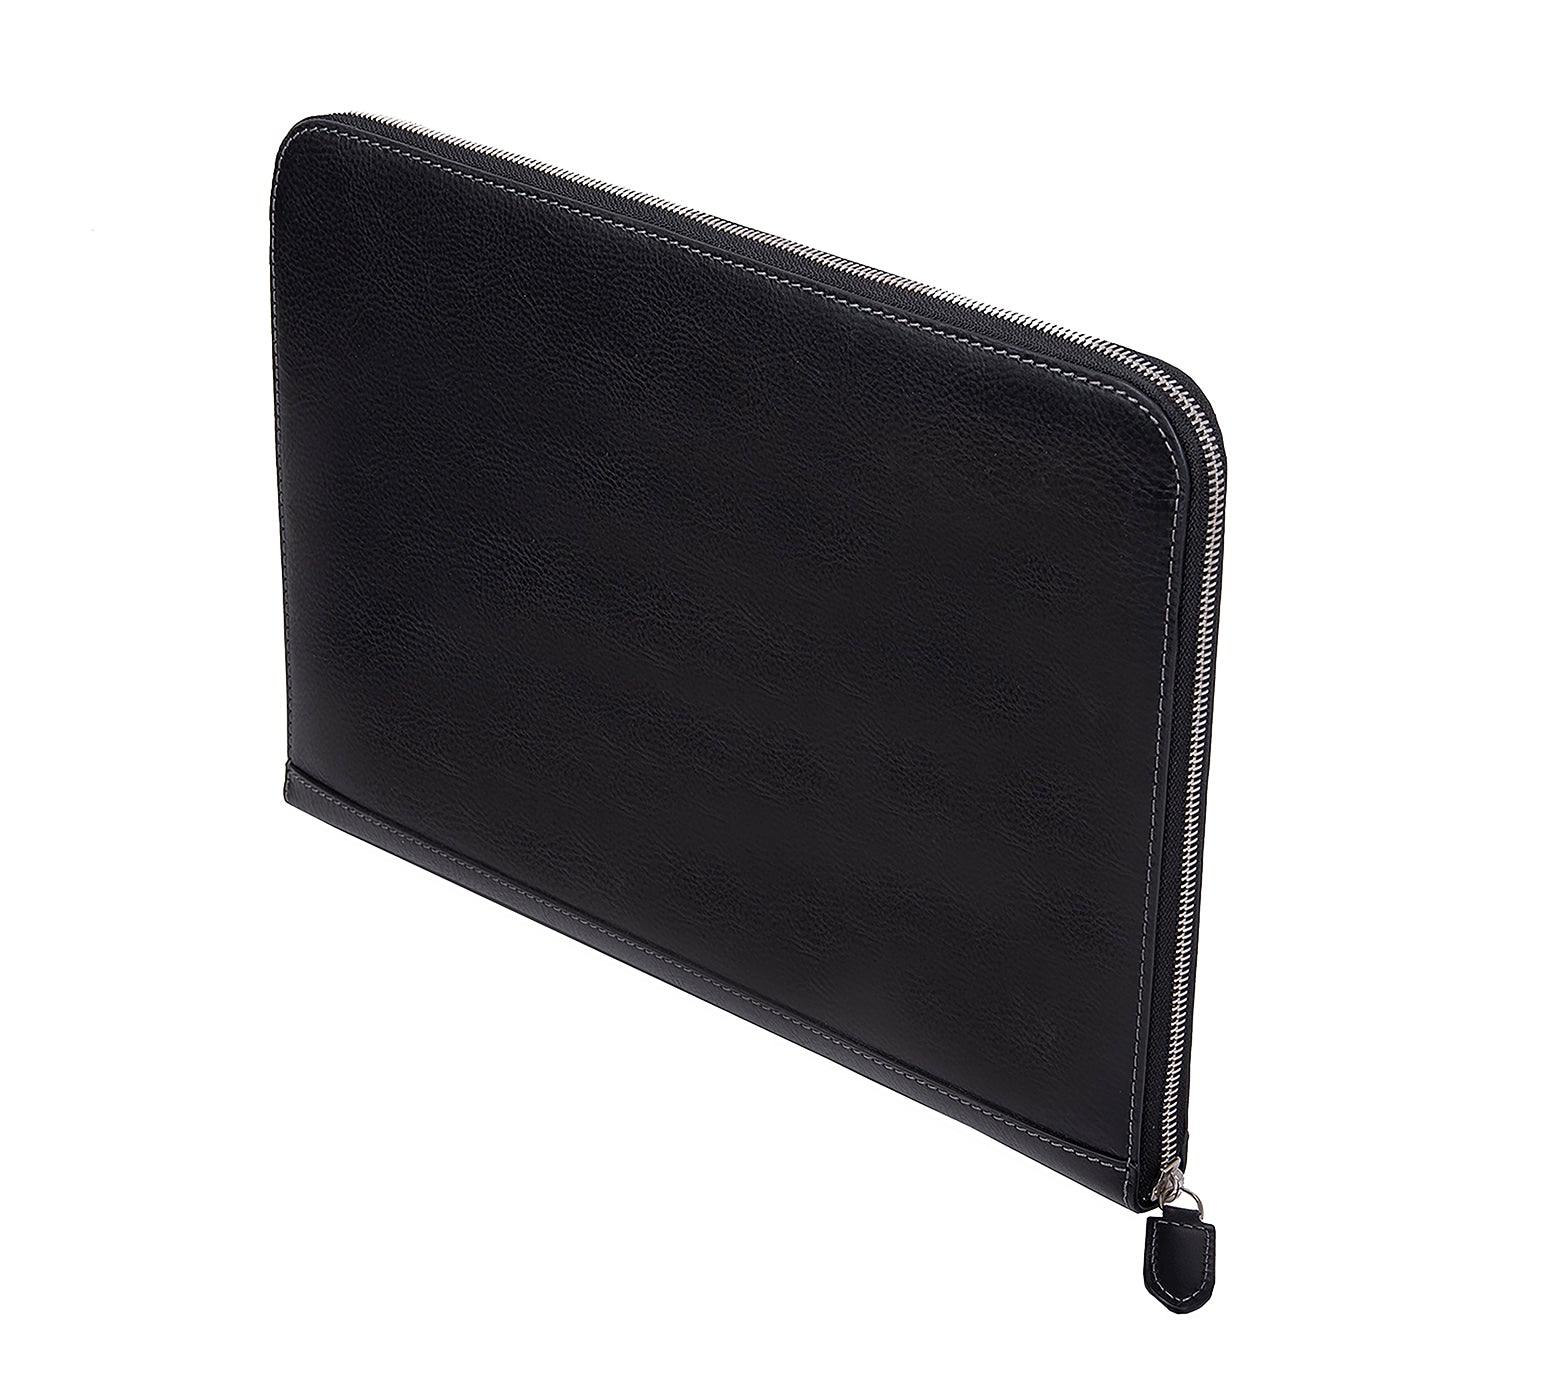 Albany Leather Document Holder from Rydal in 'Black' standing. 